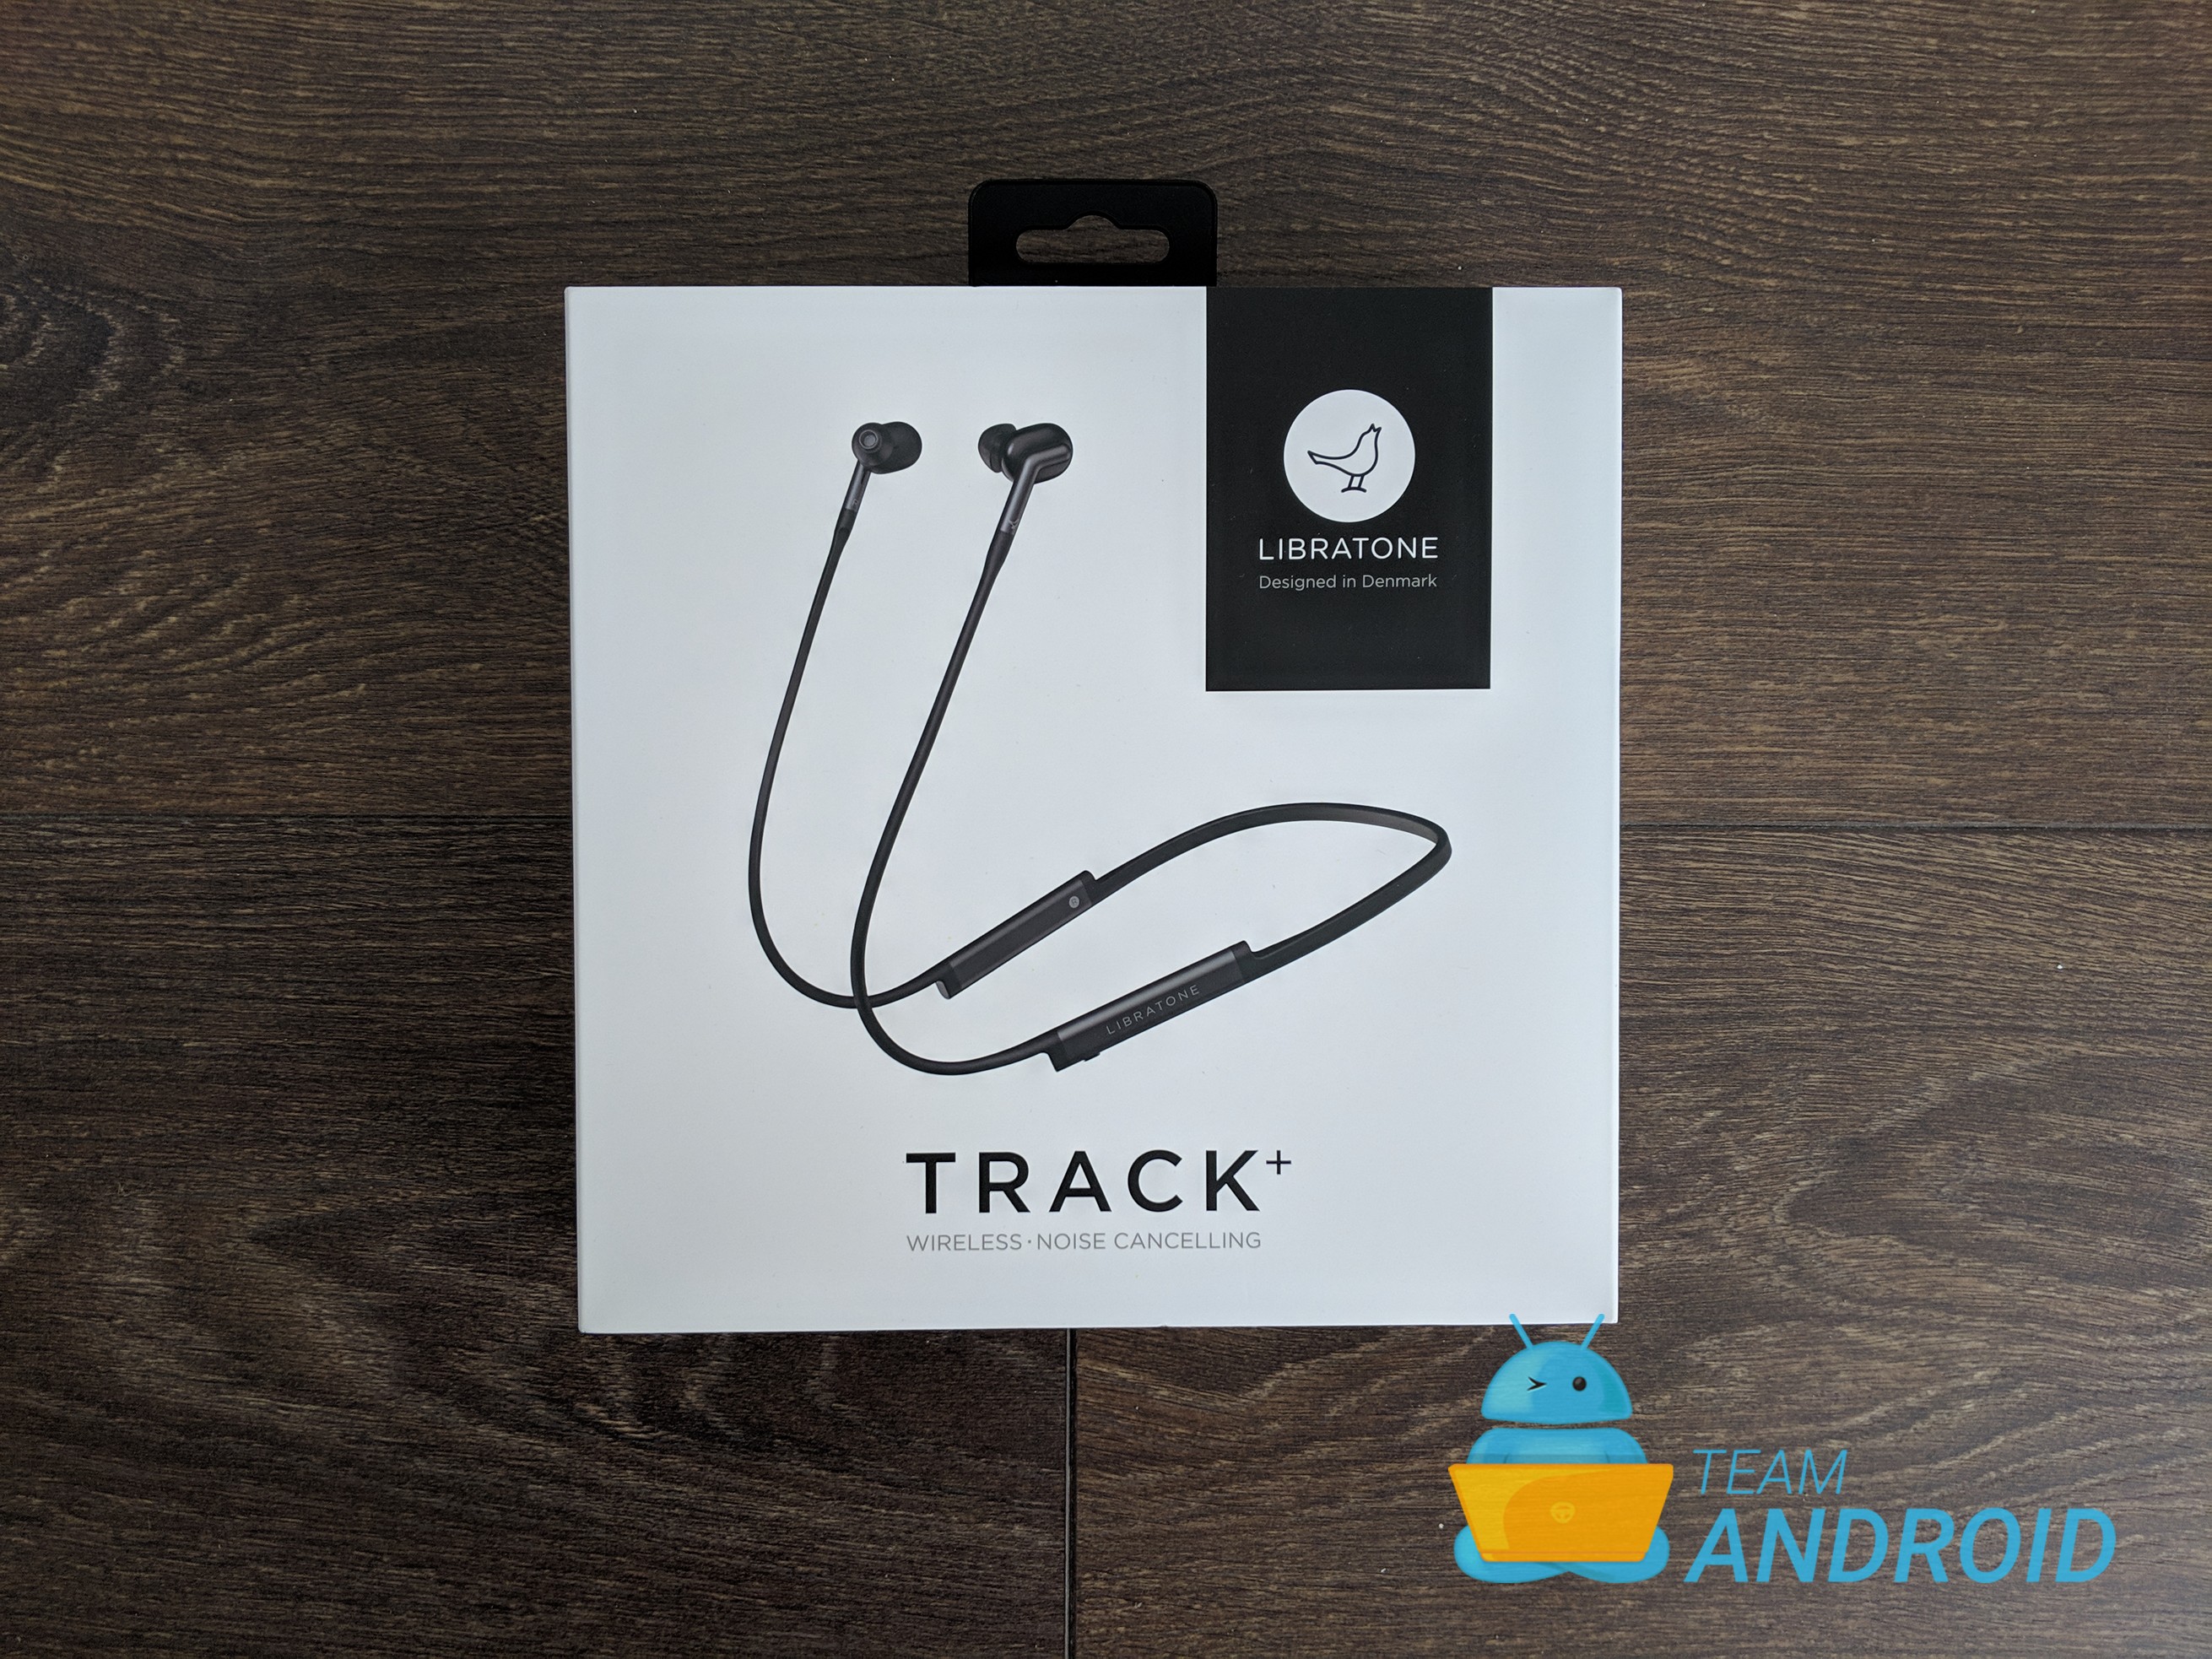 Libratone Track+ Box - Wireless earphones with Active Noise Cancellation